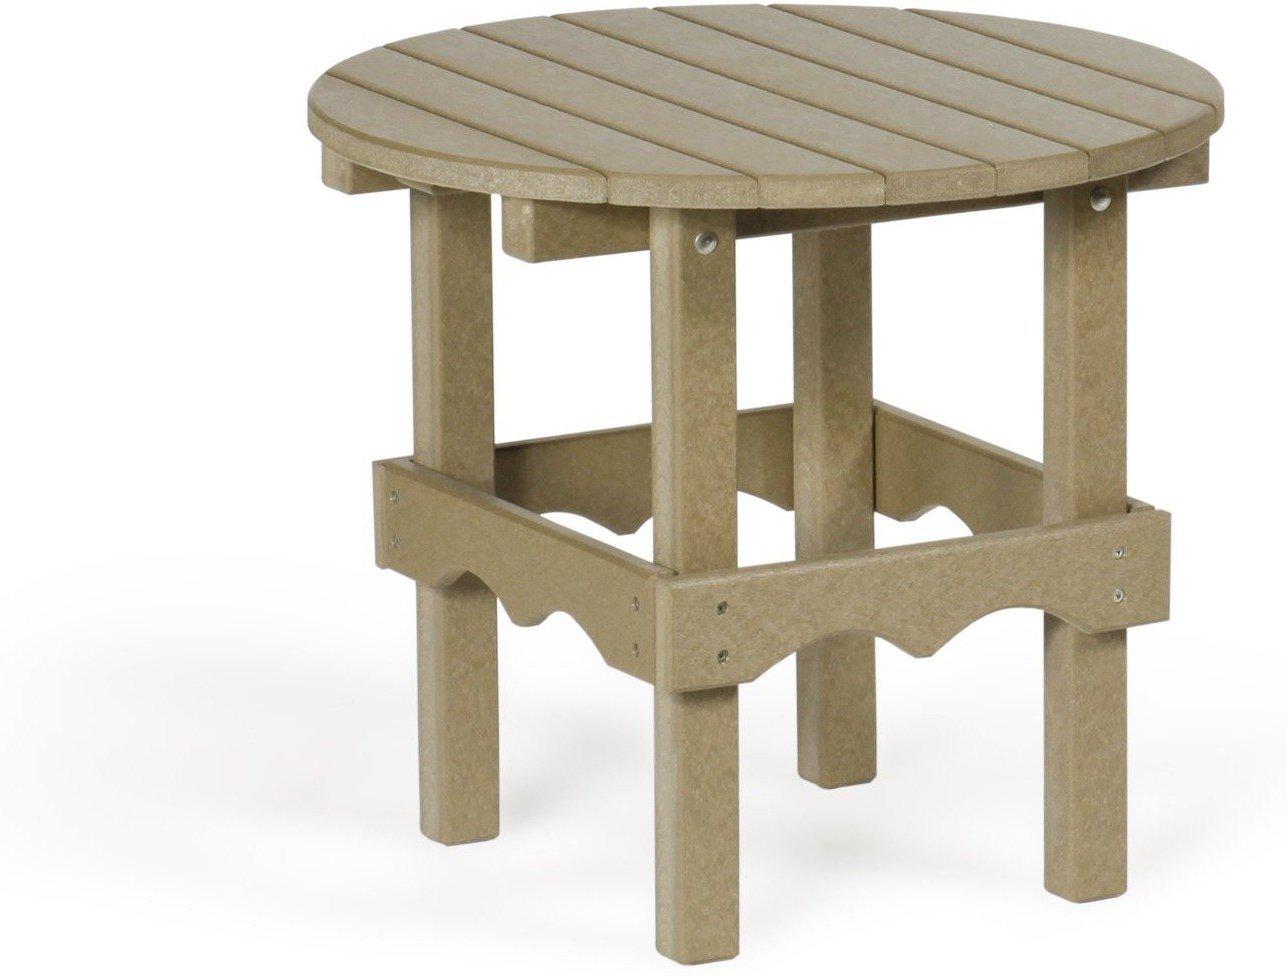 Leisure Lawns Chair and Small Table Collection